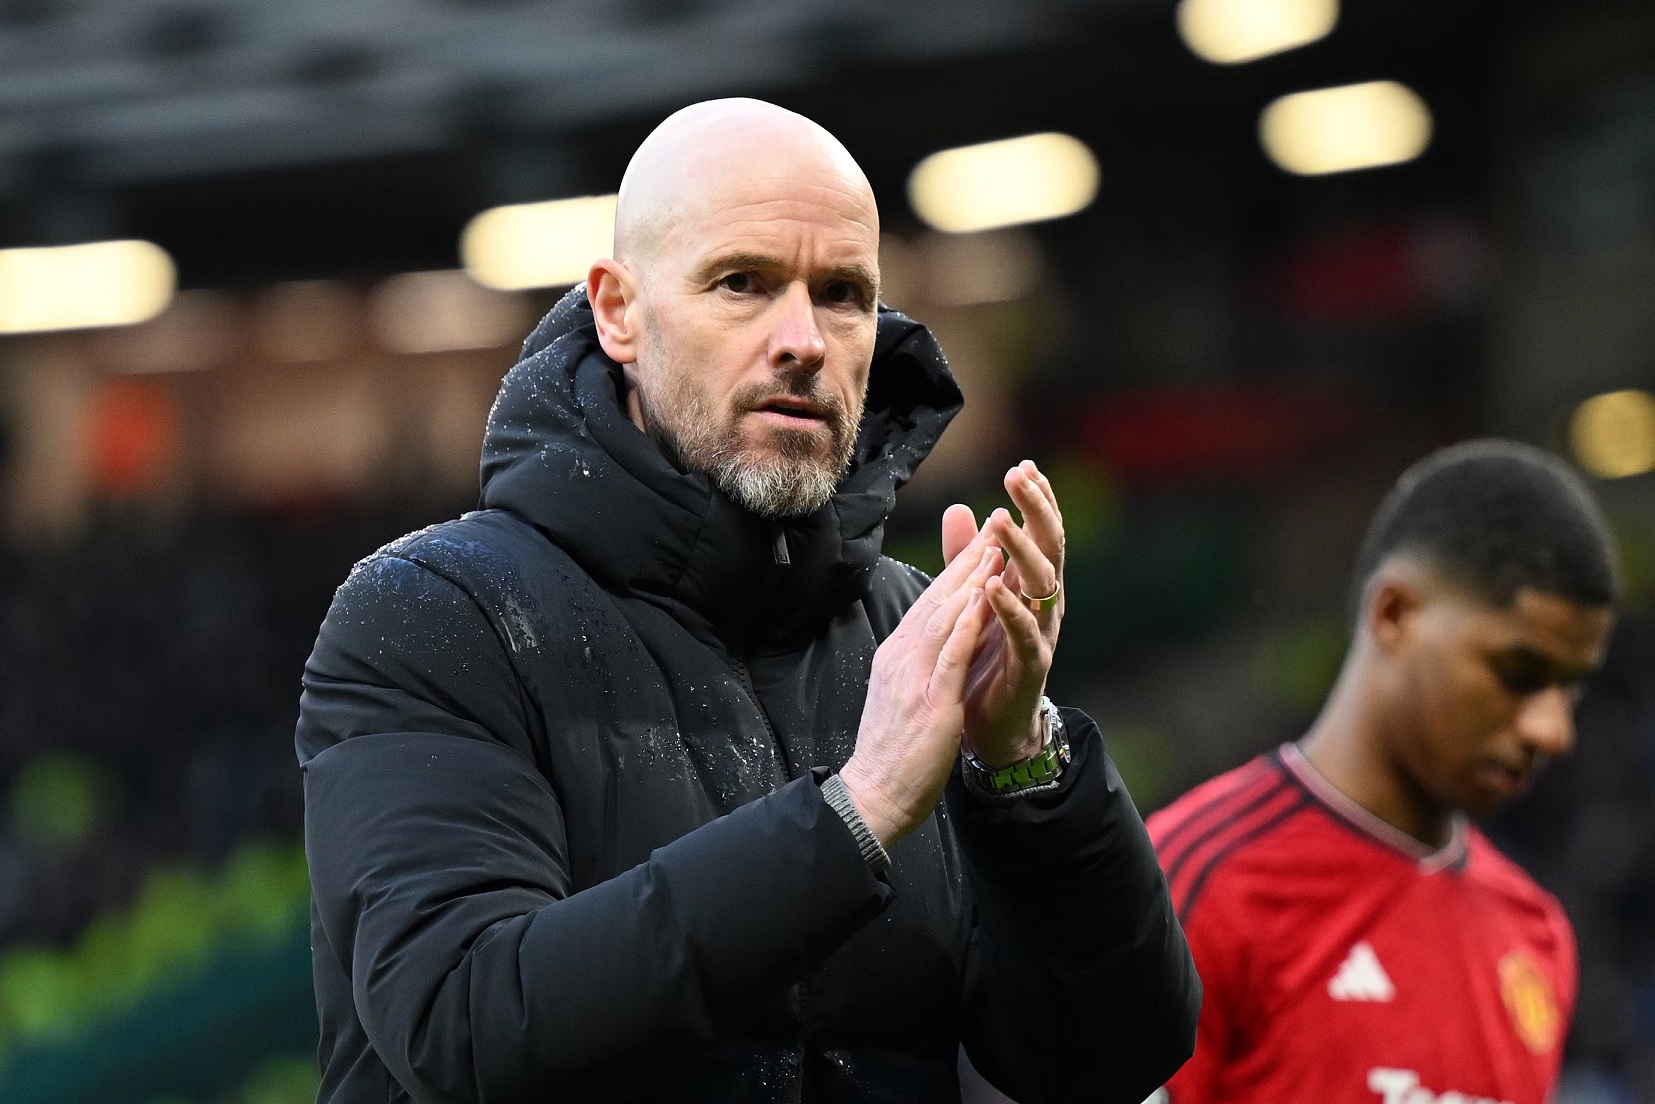 “May be enough” – Pundit thinks Ten Hag’s job could be safe if he achieves two things